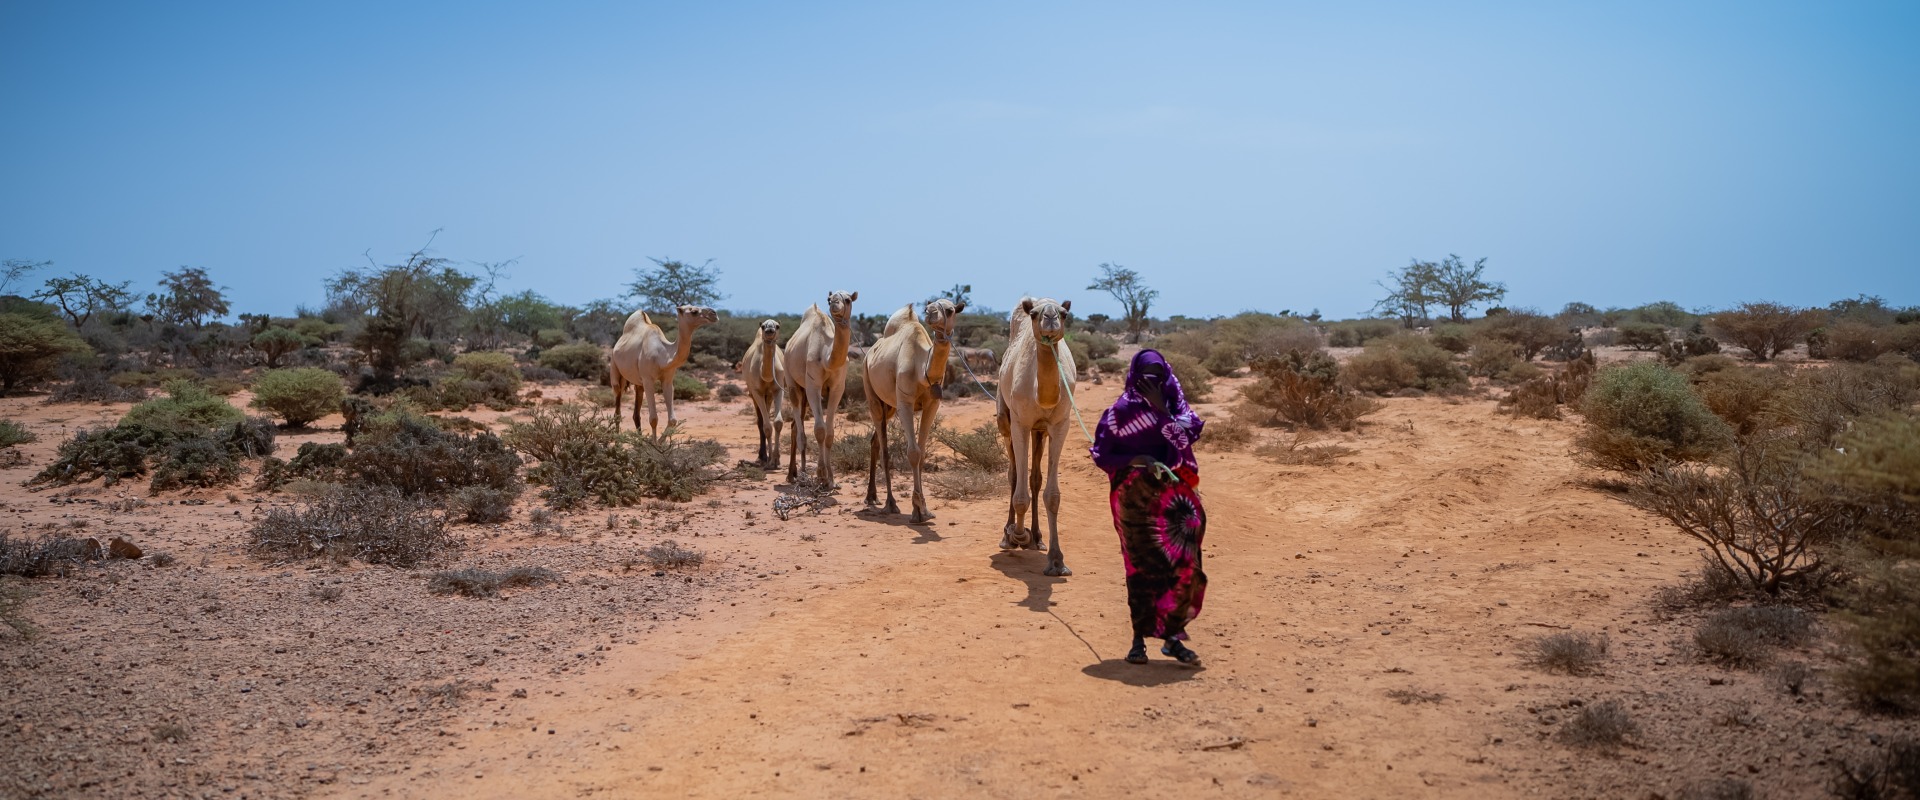 A woman walks through dry lands with her livestock. Many like her face hunger due to severe drought in Somalia.